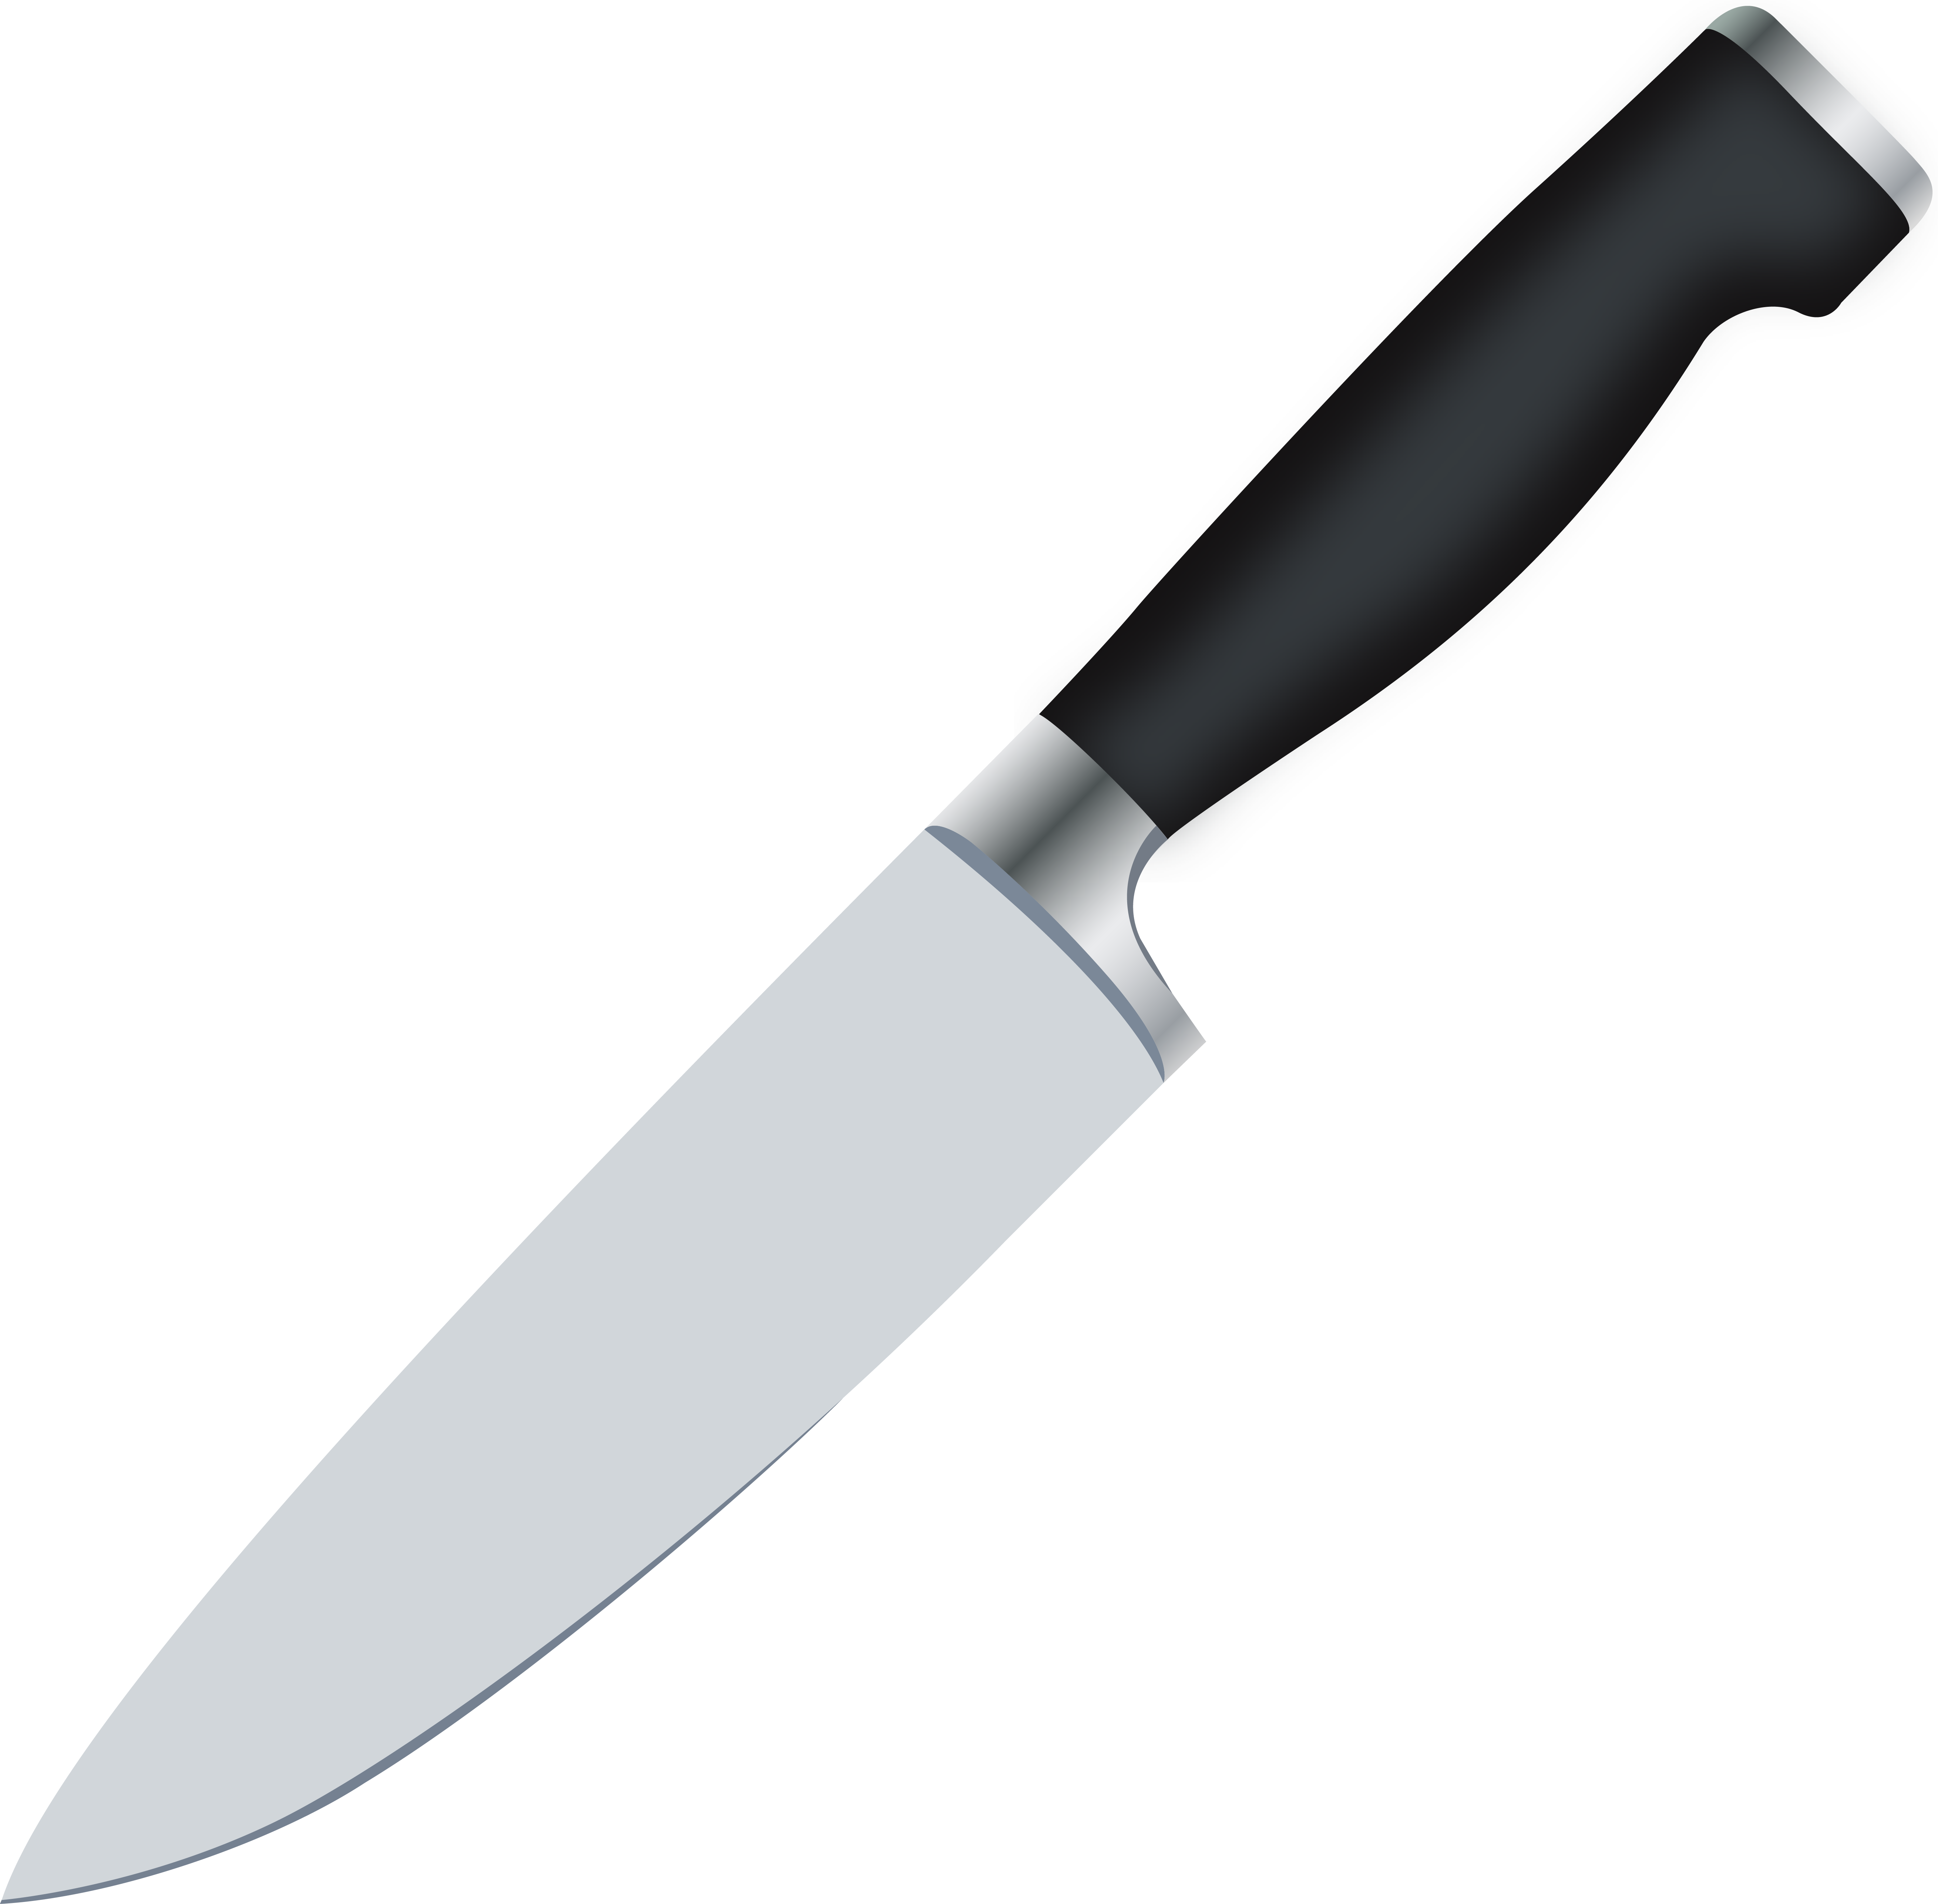 Chef silhouette at getdrawings. Knife clipart utility knife